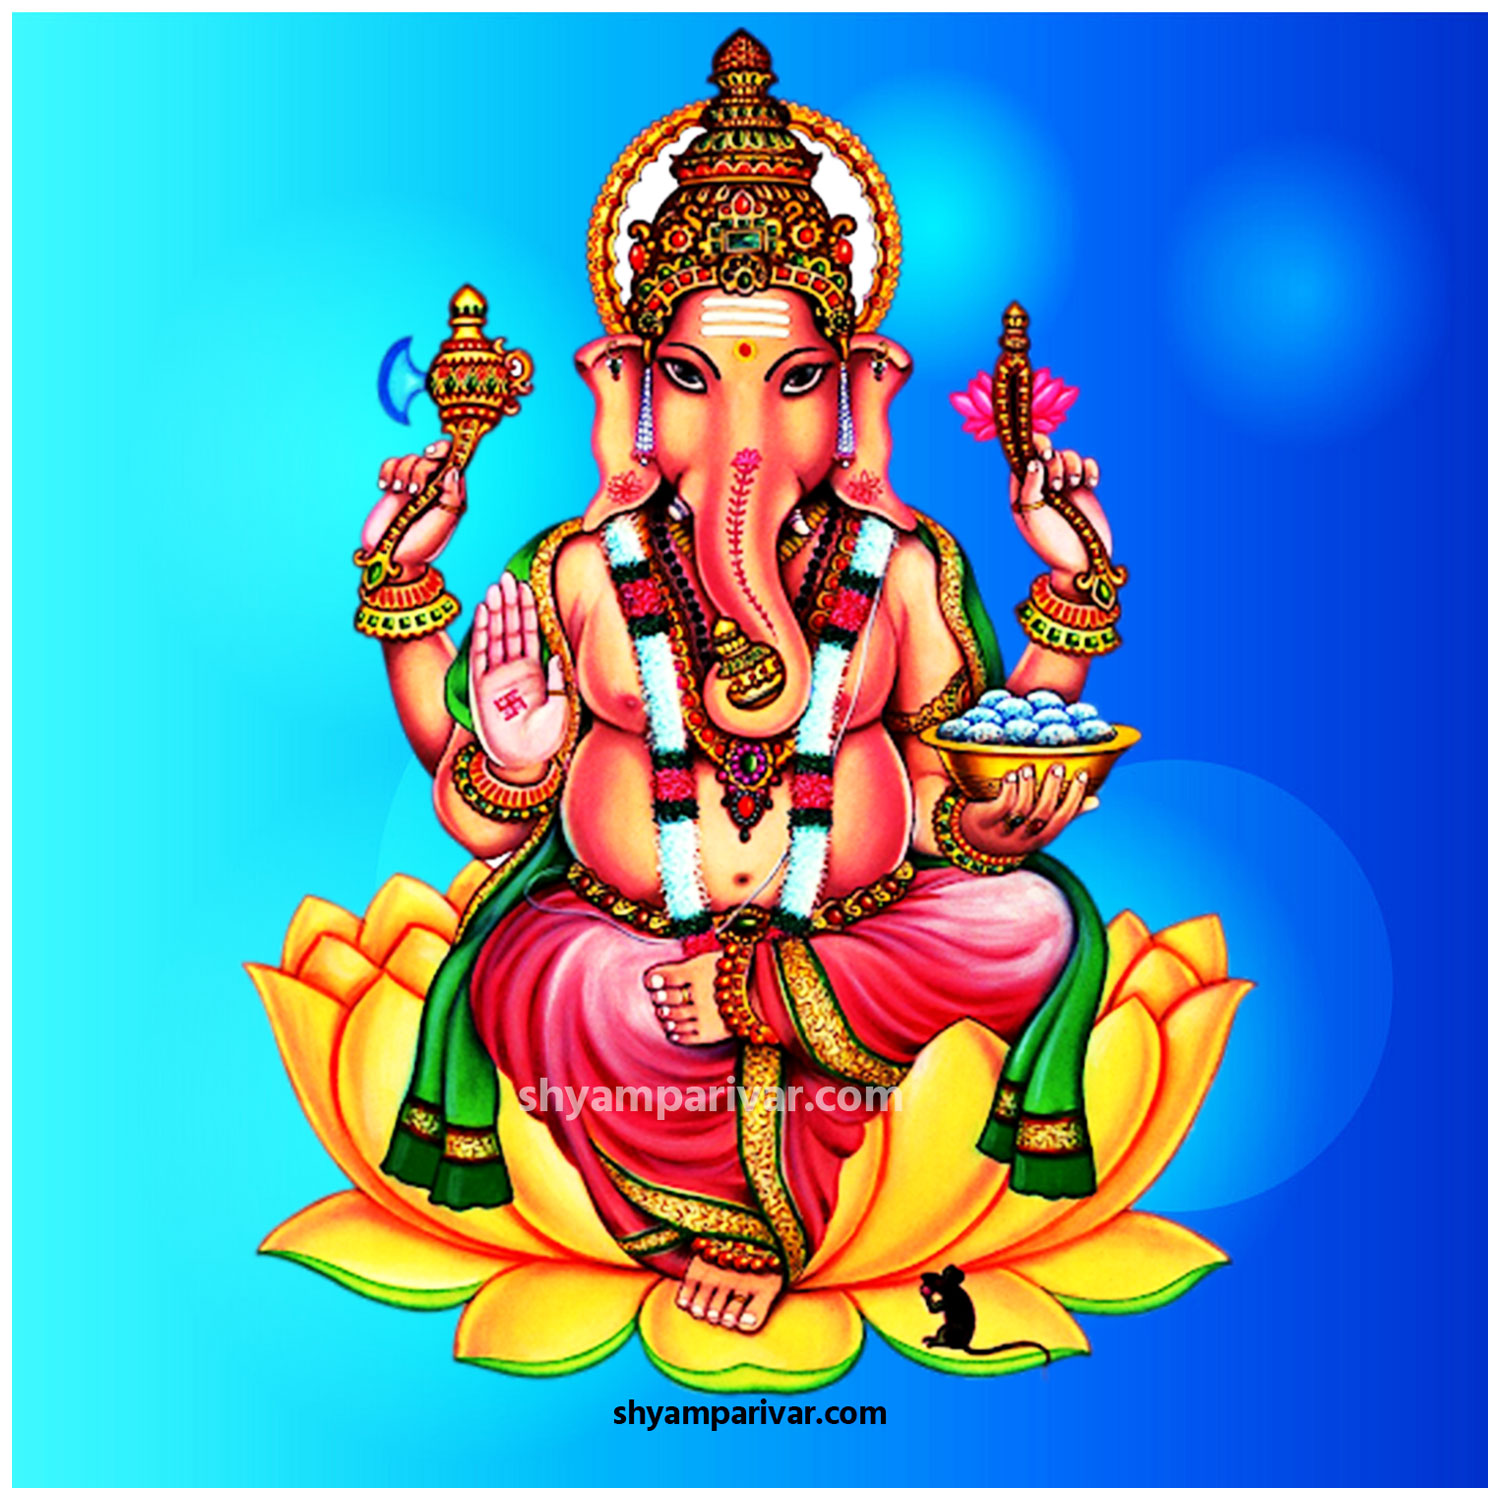 20 Most Beautiful Lord Ganesh Photo And Images